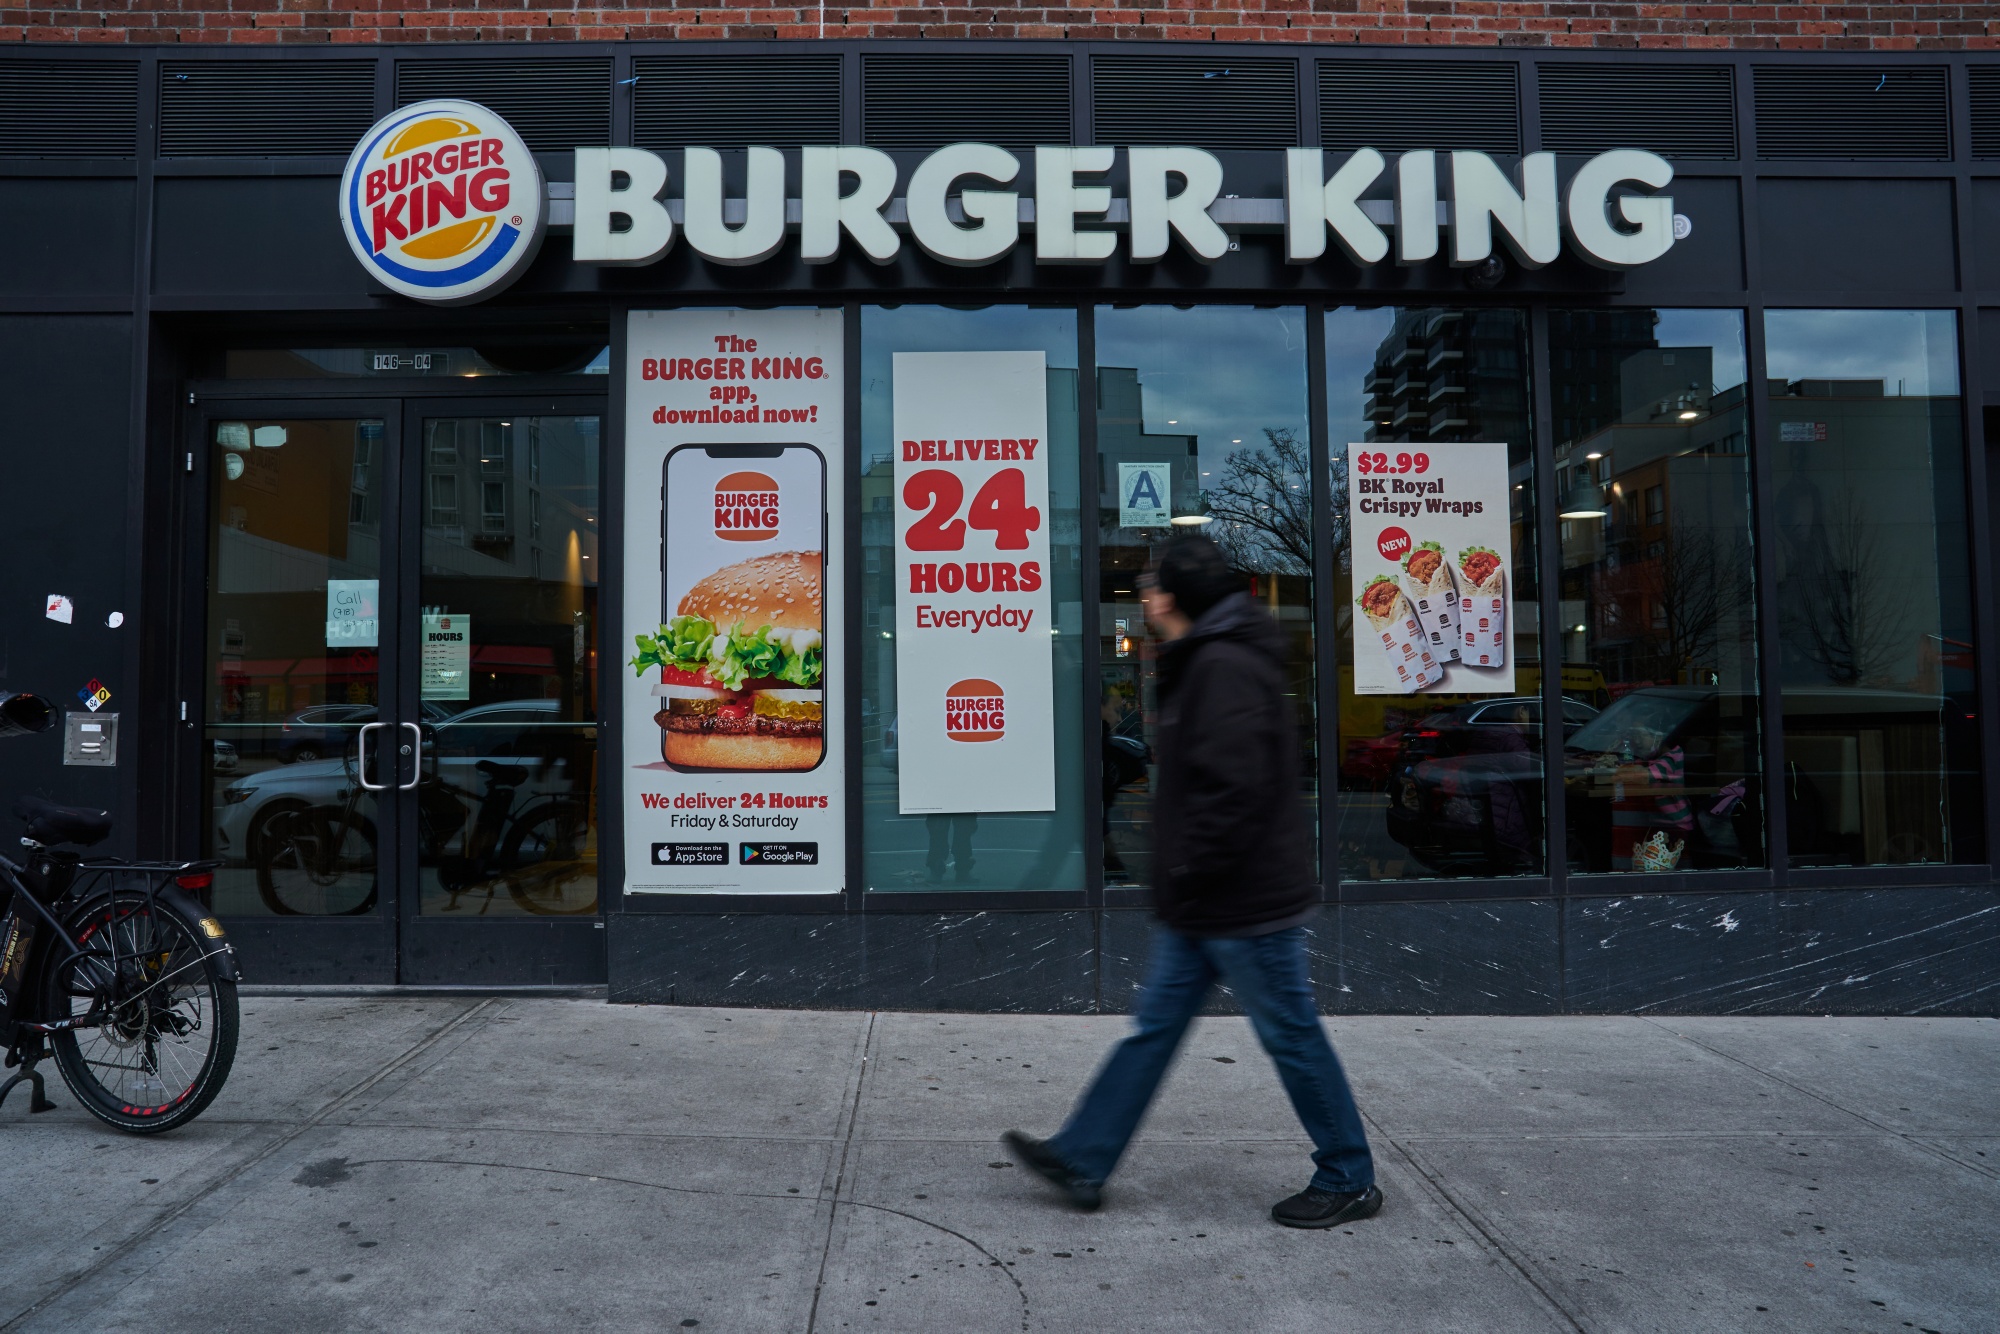 &nbsp;

Restaurant Brands, the holding company that operates Burger King,&nbsp;is gearing up to expand its global footprint.